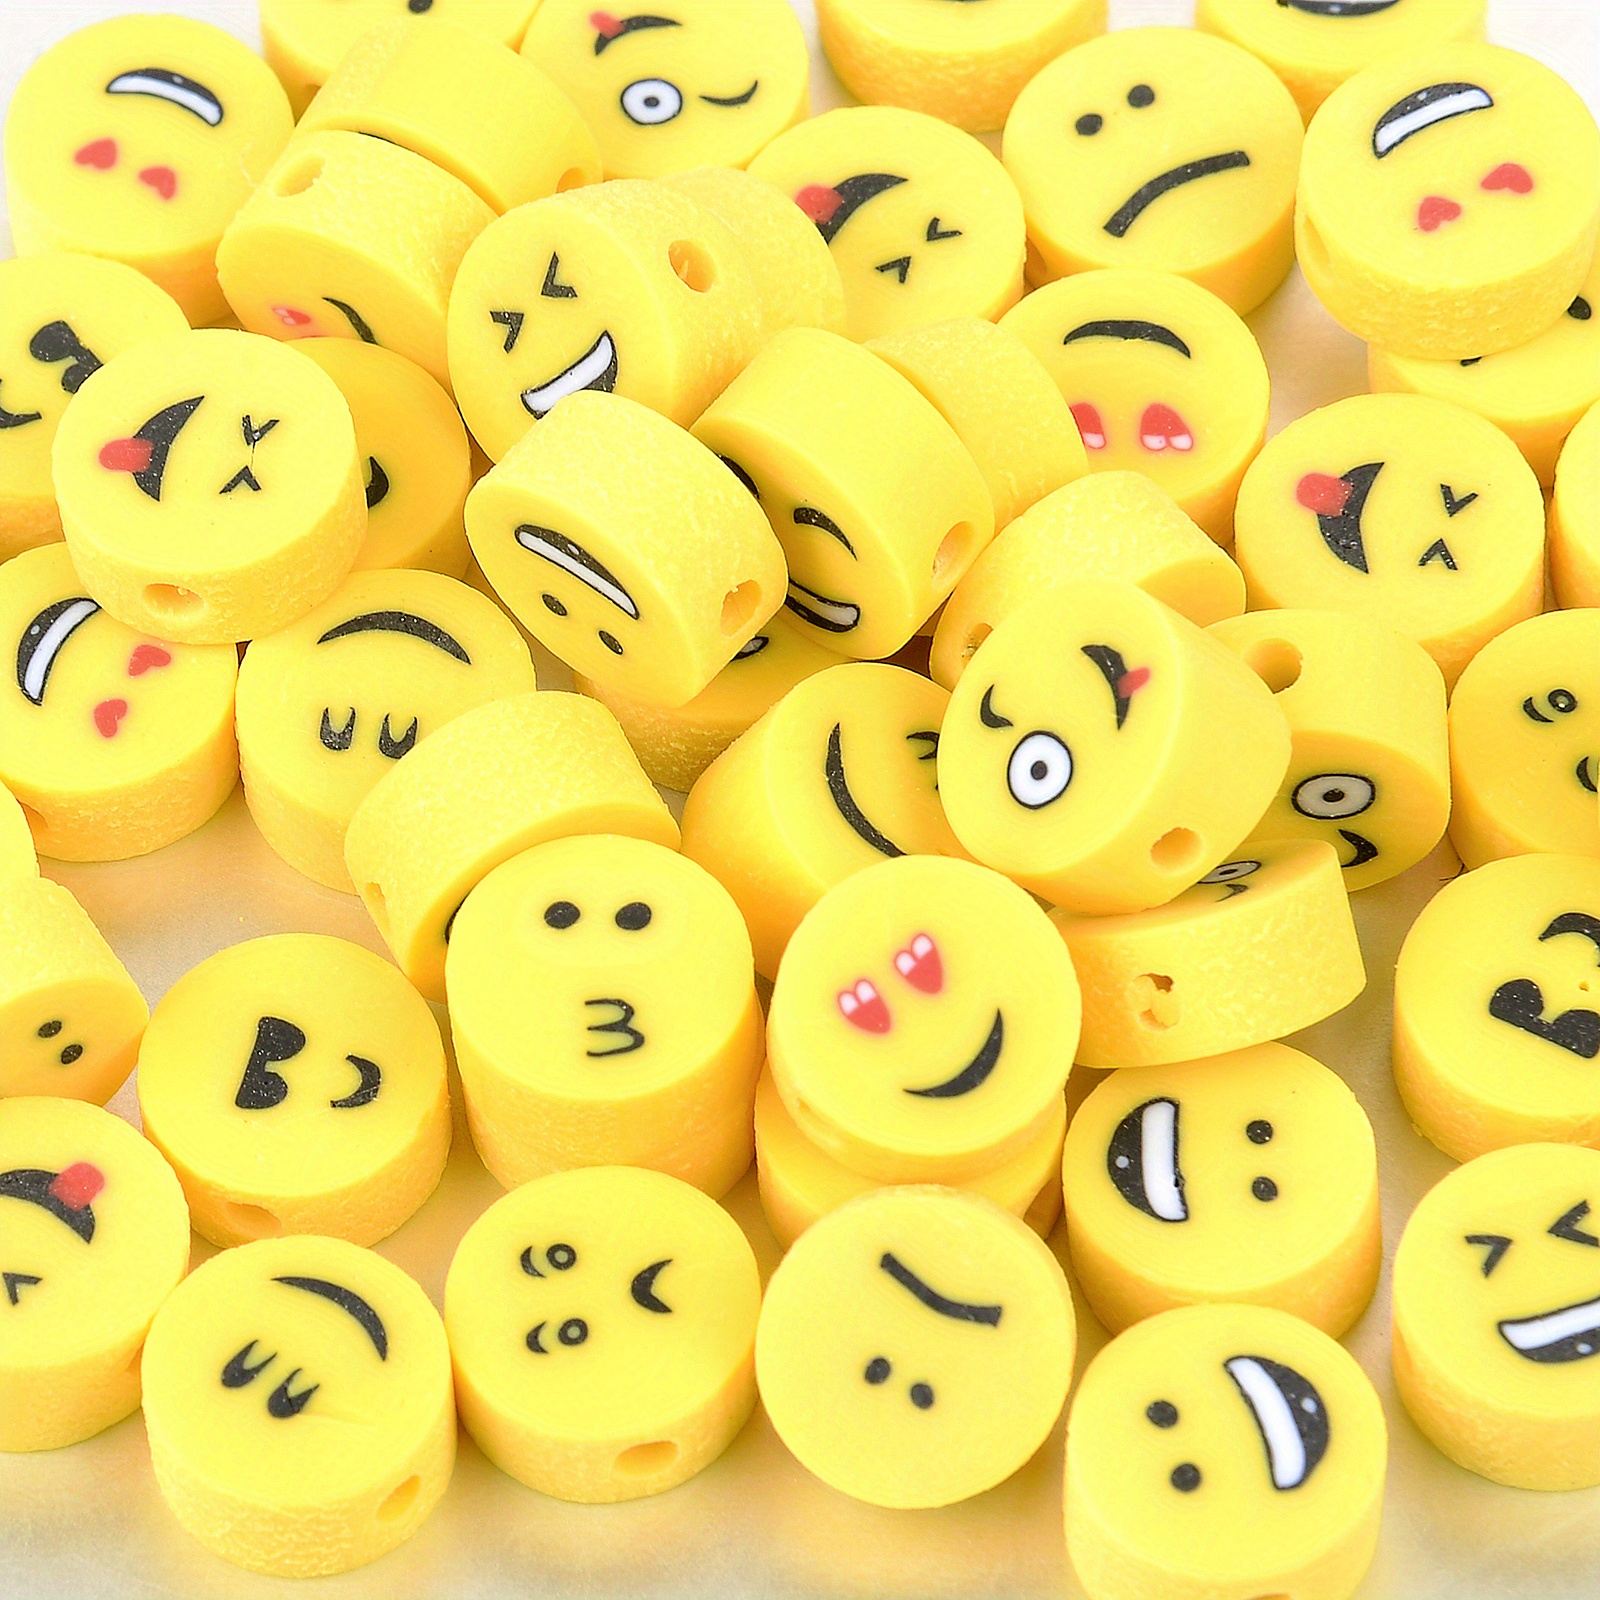 30/50/100Pcs 10mm Smiley Face Polymer Clay Beads White Loose Spacer Beads  For Making Bracelet